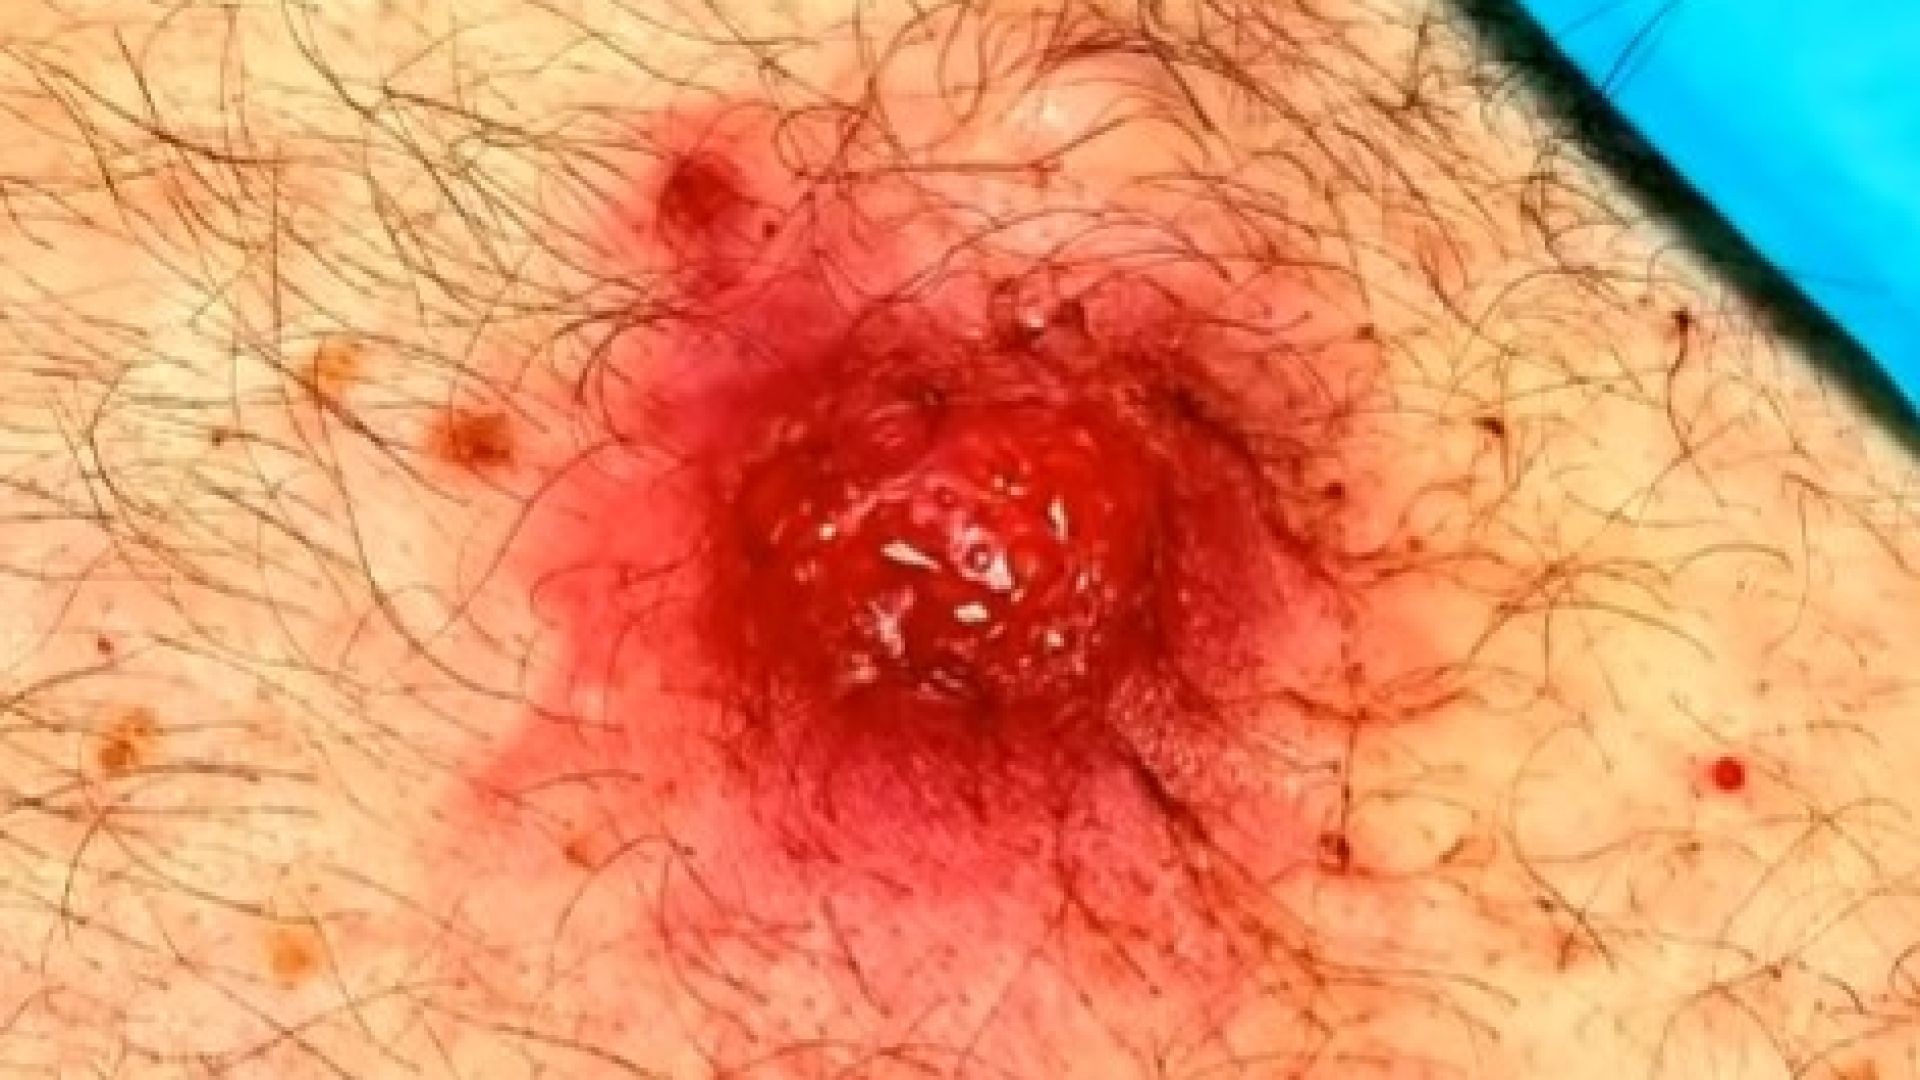 Peeling and popping a big absces shorts dermatologist